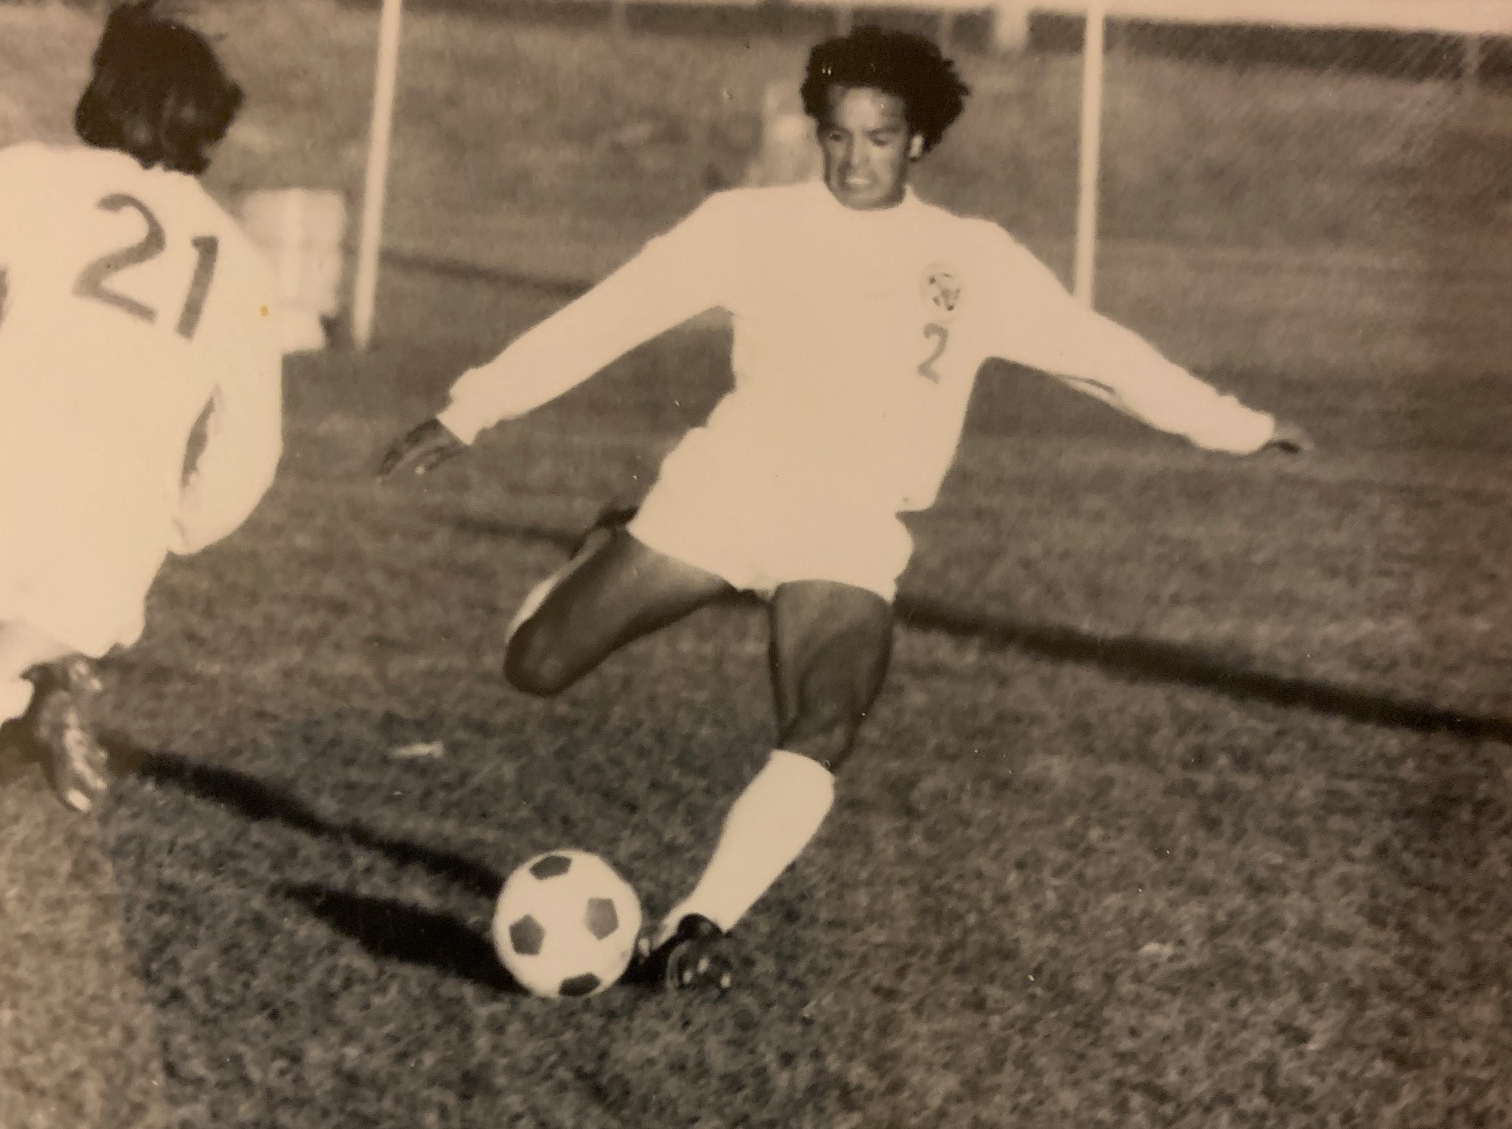 Frank Vizcarra playing soccer at Ohio State